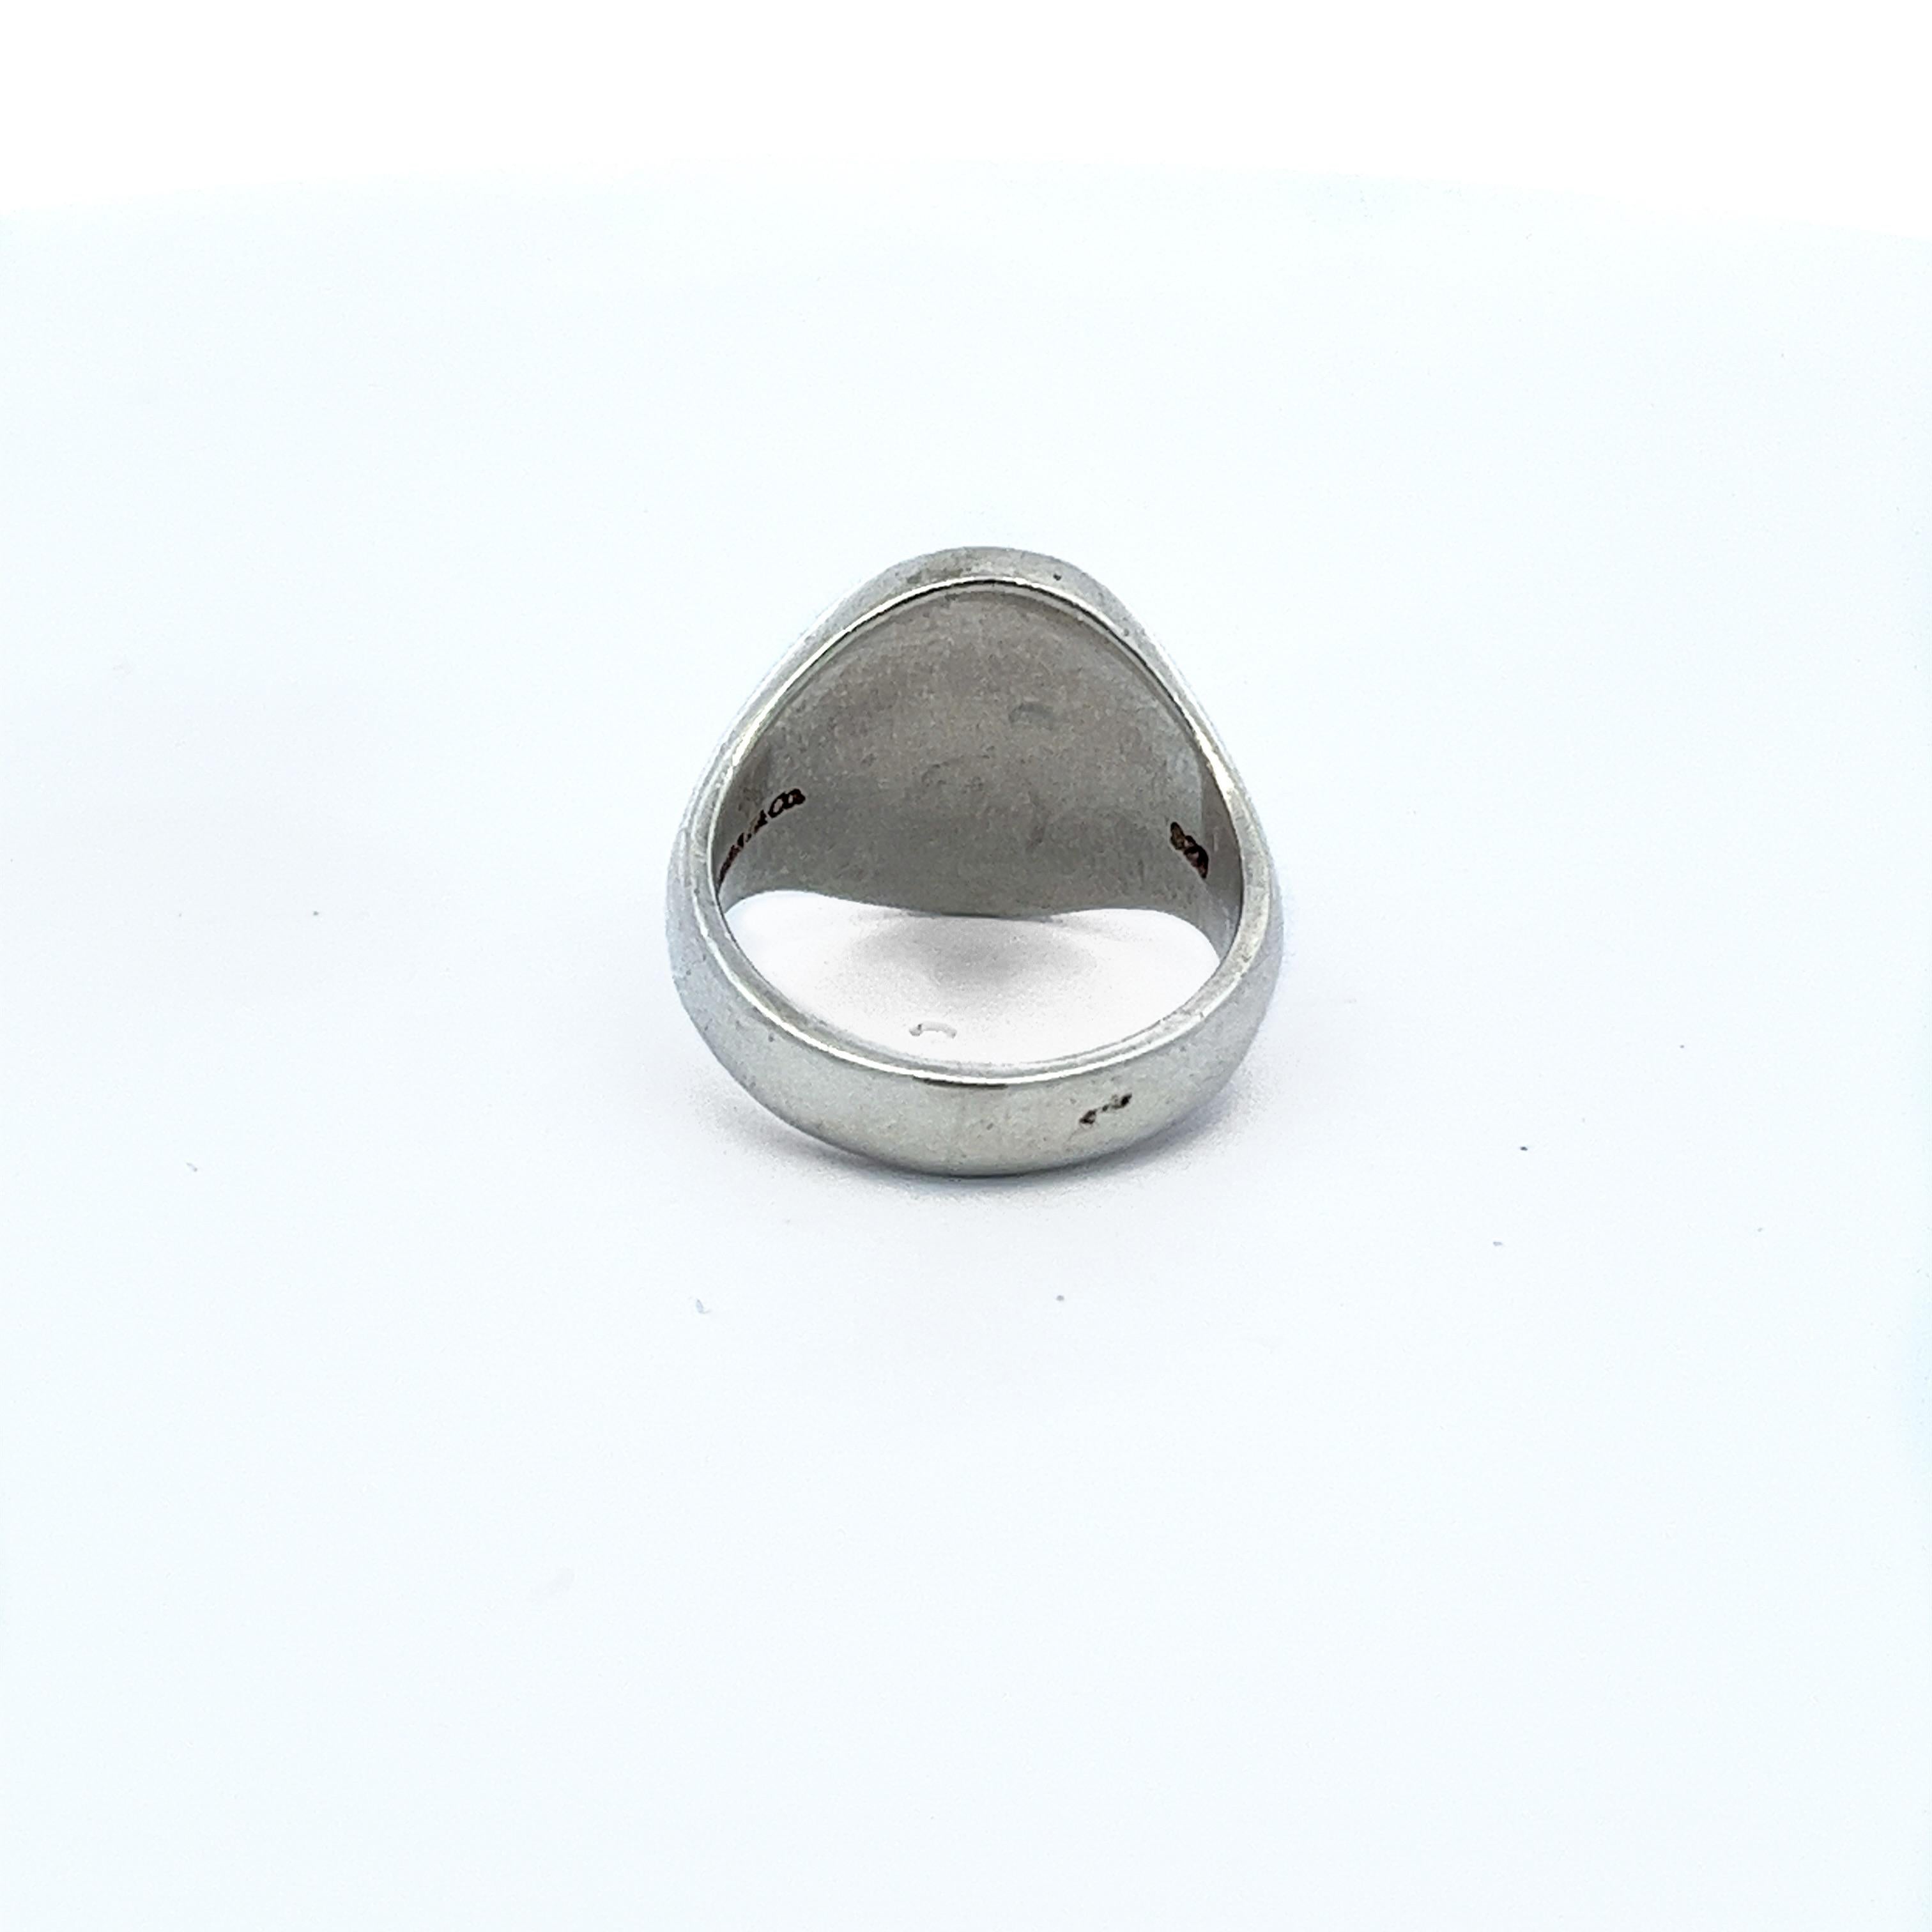 Rare Vintage Tiffany & Co. Unembellished Signet Ring in Sterling Silver, 925 1